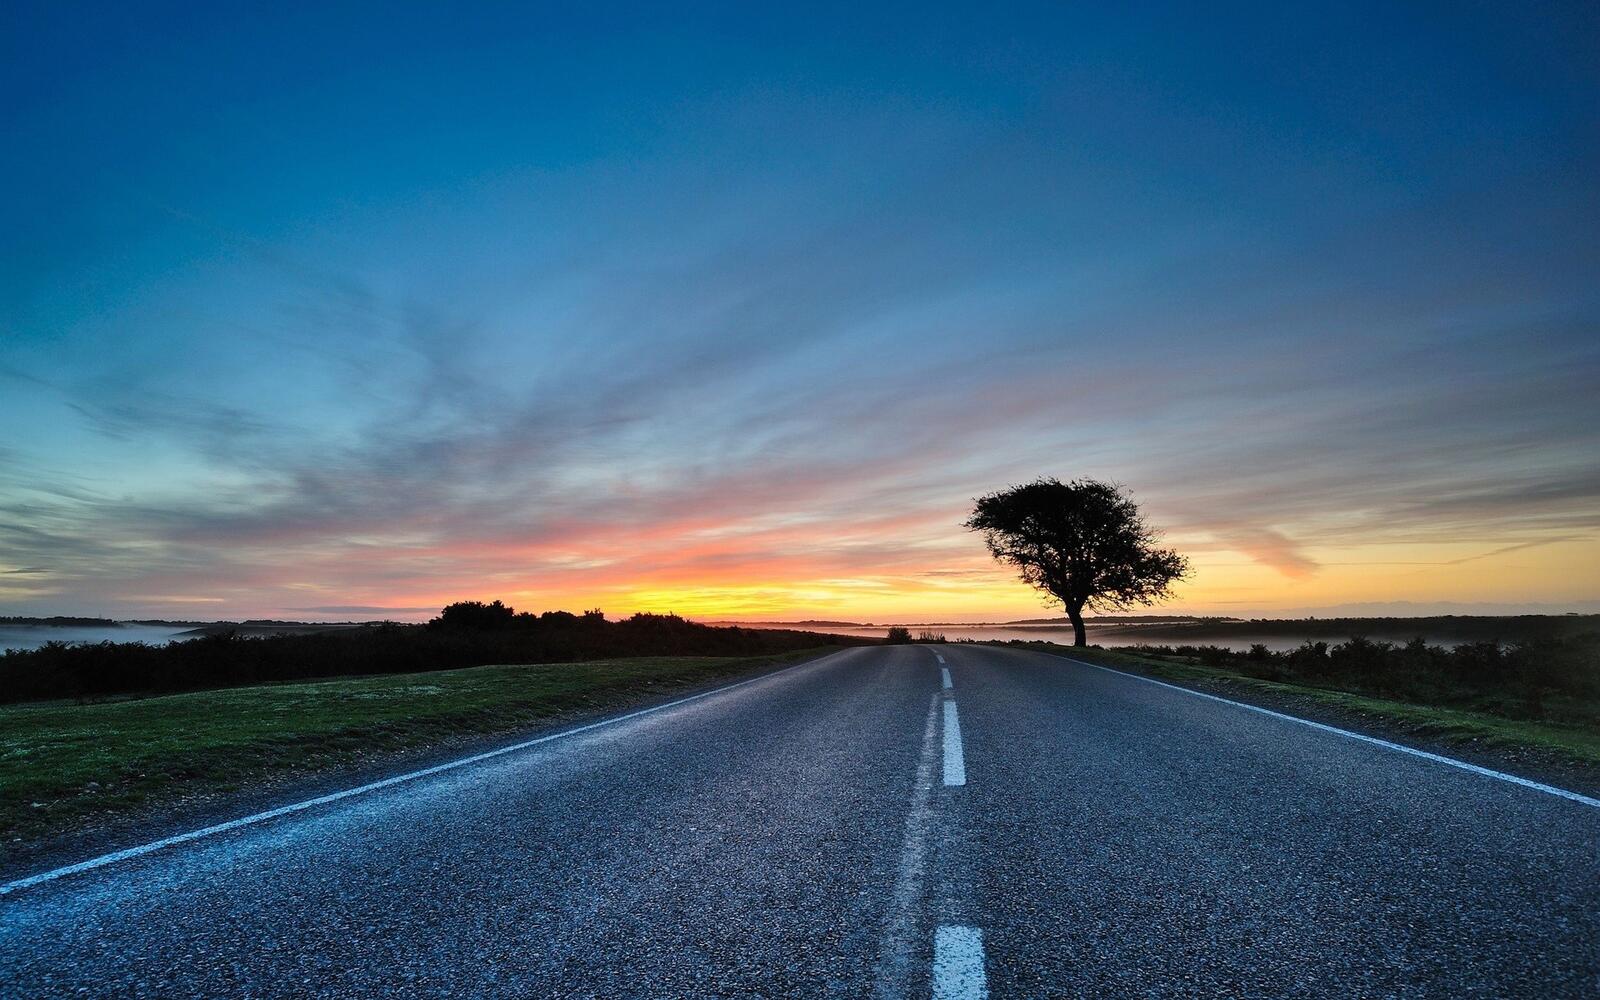 Free photo Picture of an evening landscape on a country road